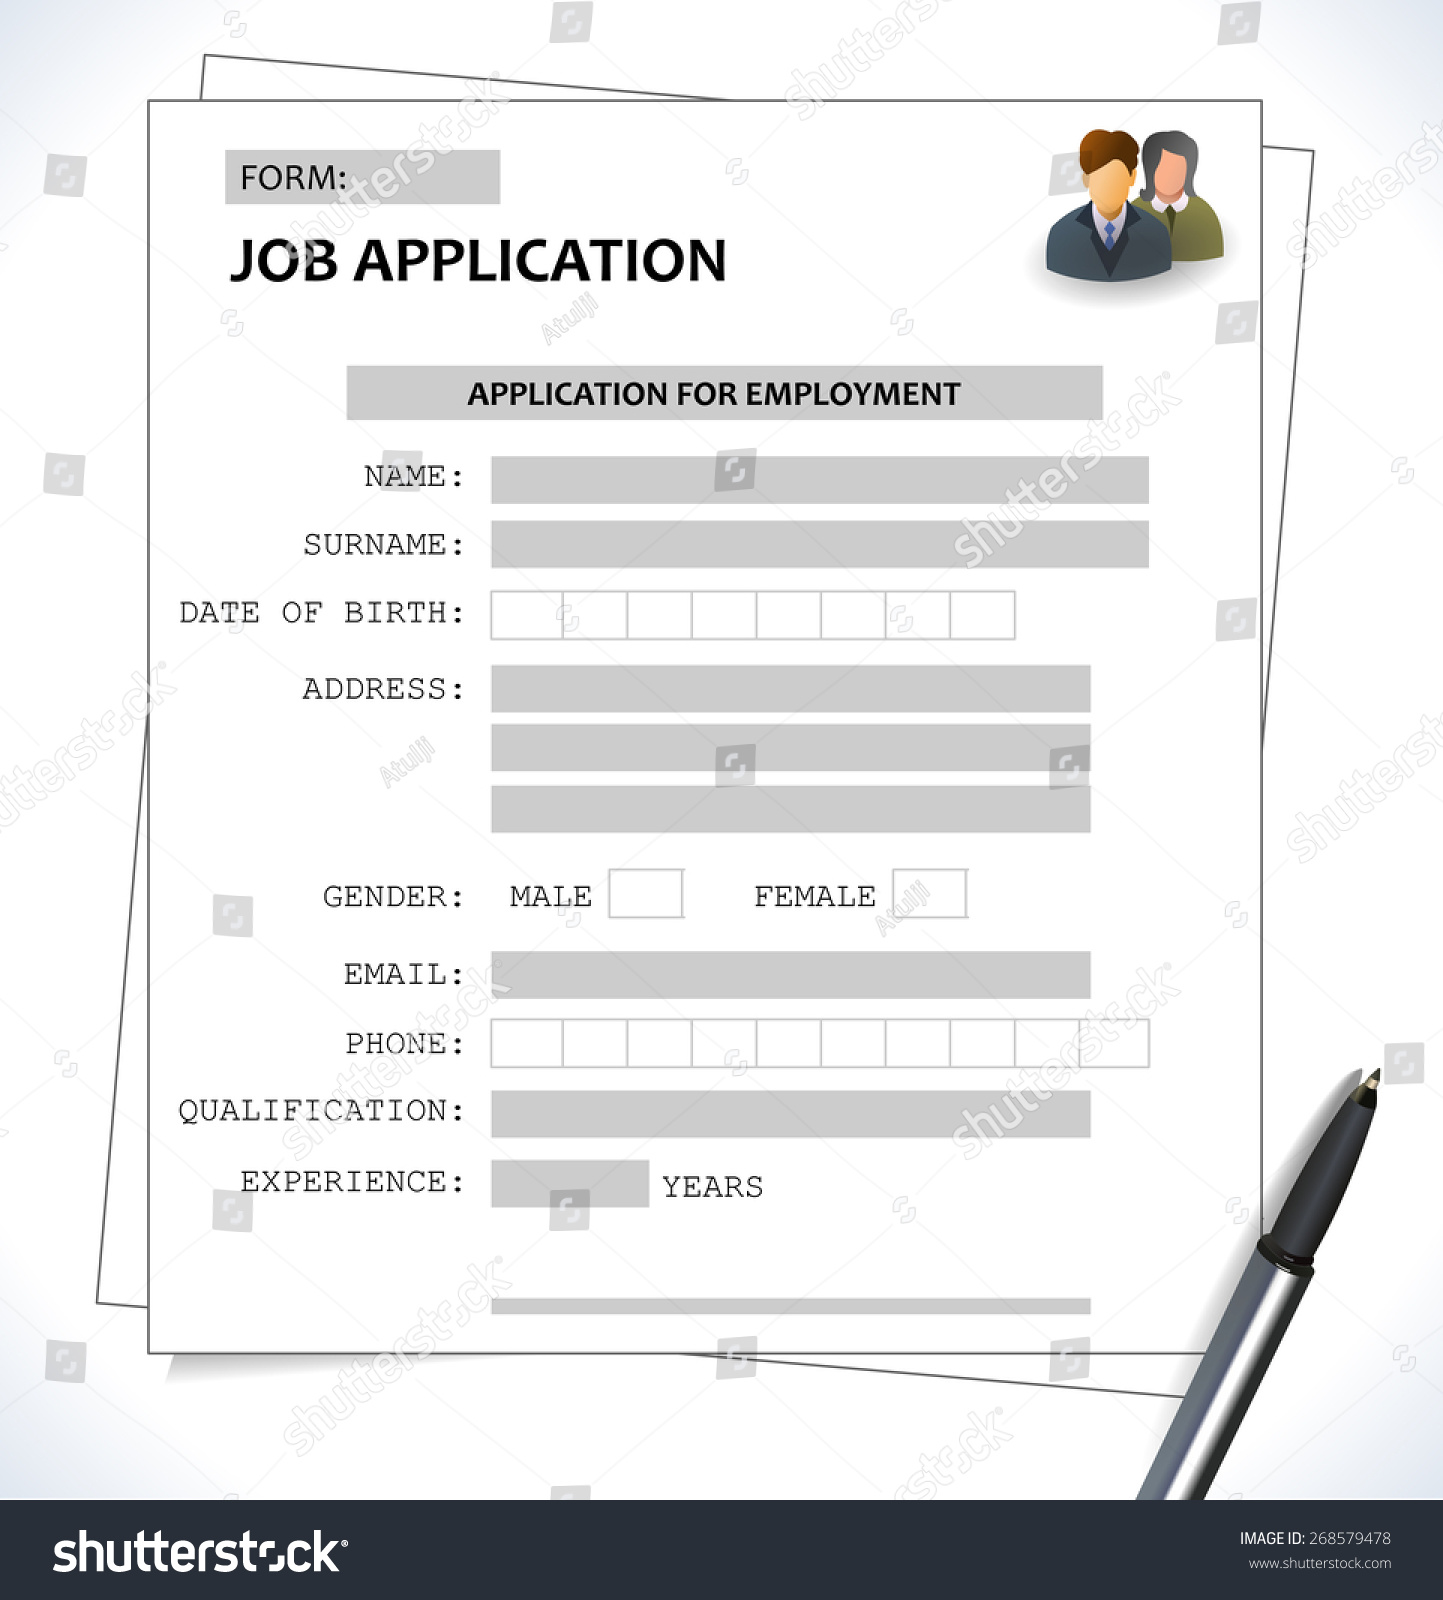 Resume Template For A Job from image.shutterstock.com